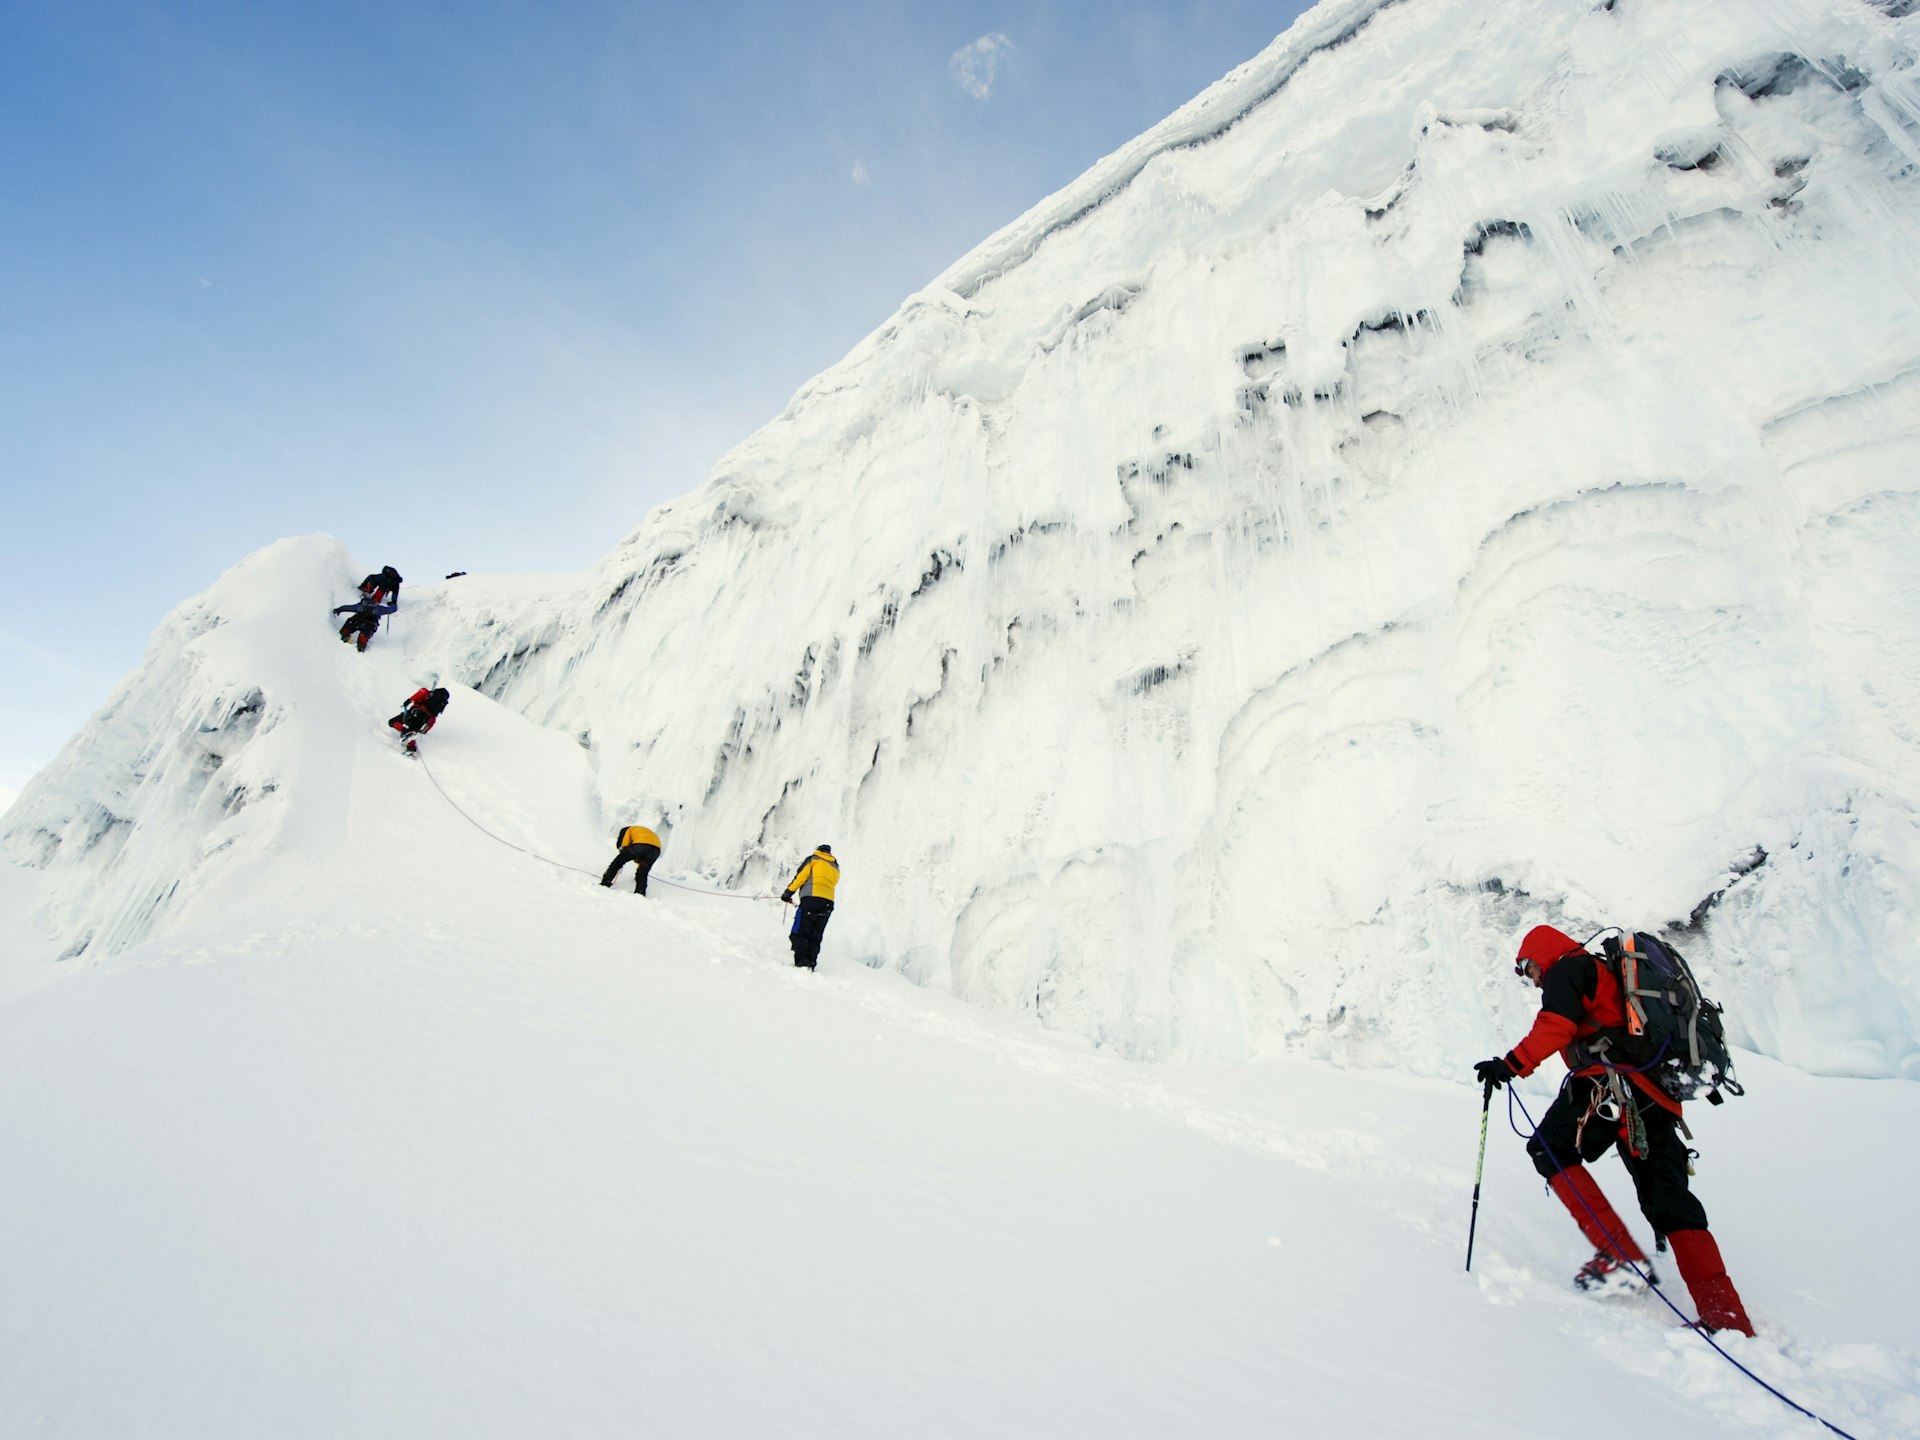 Five climbers laden with mountain-climbing gear work their way up a snowy path on the slopes of Volcan Cotpaxi